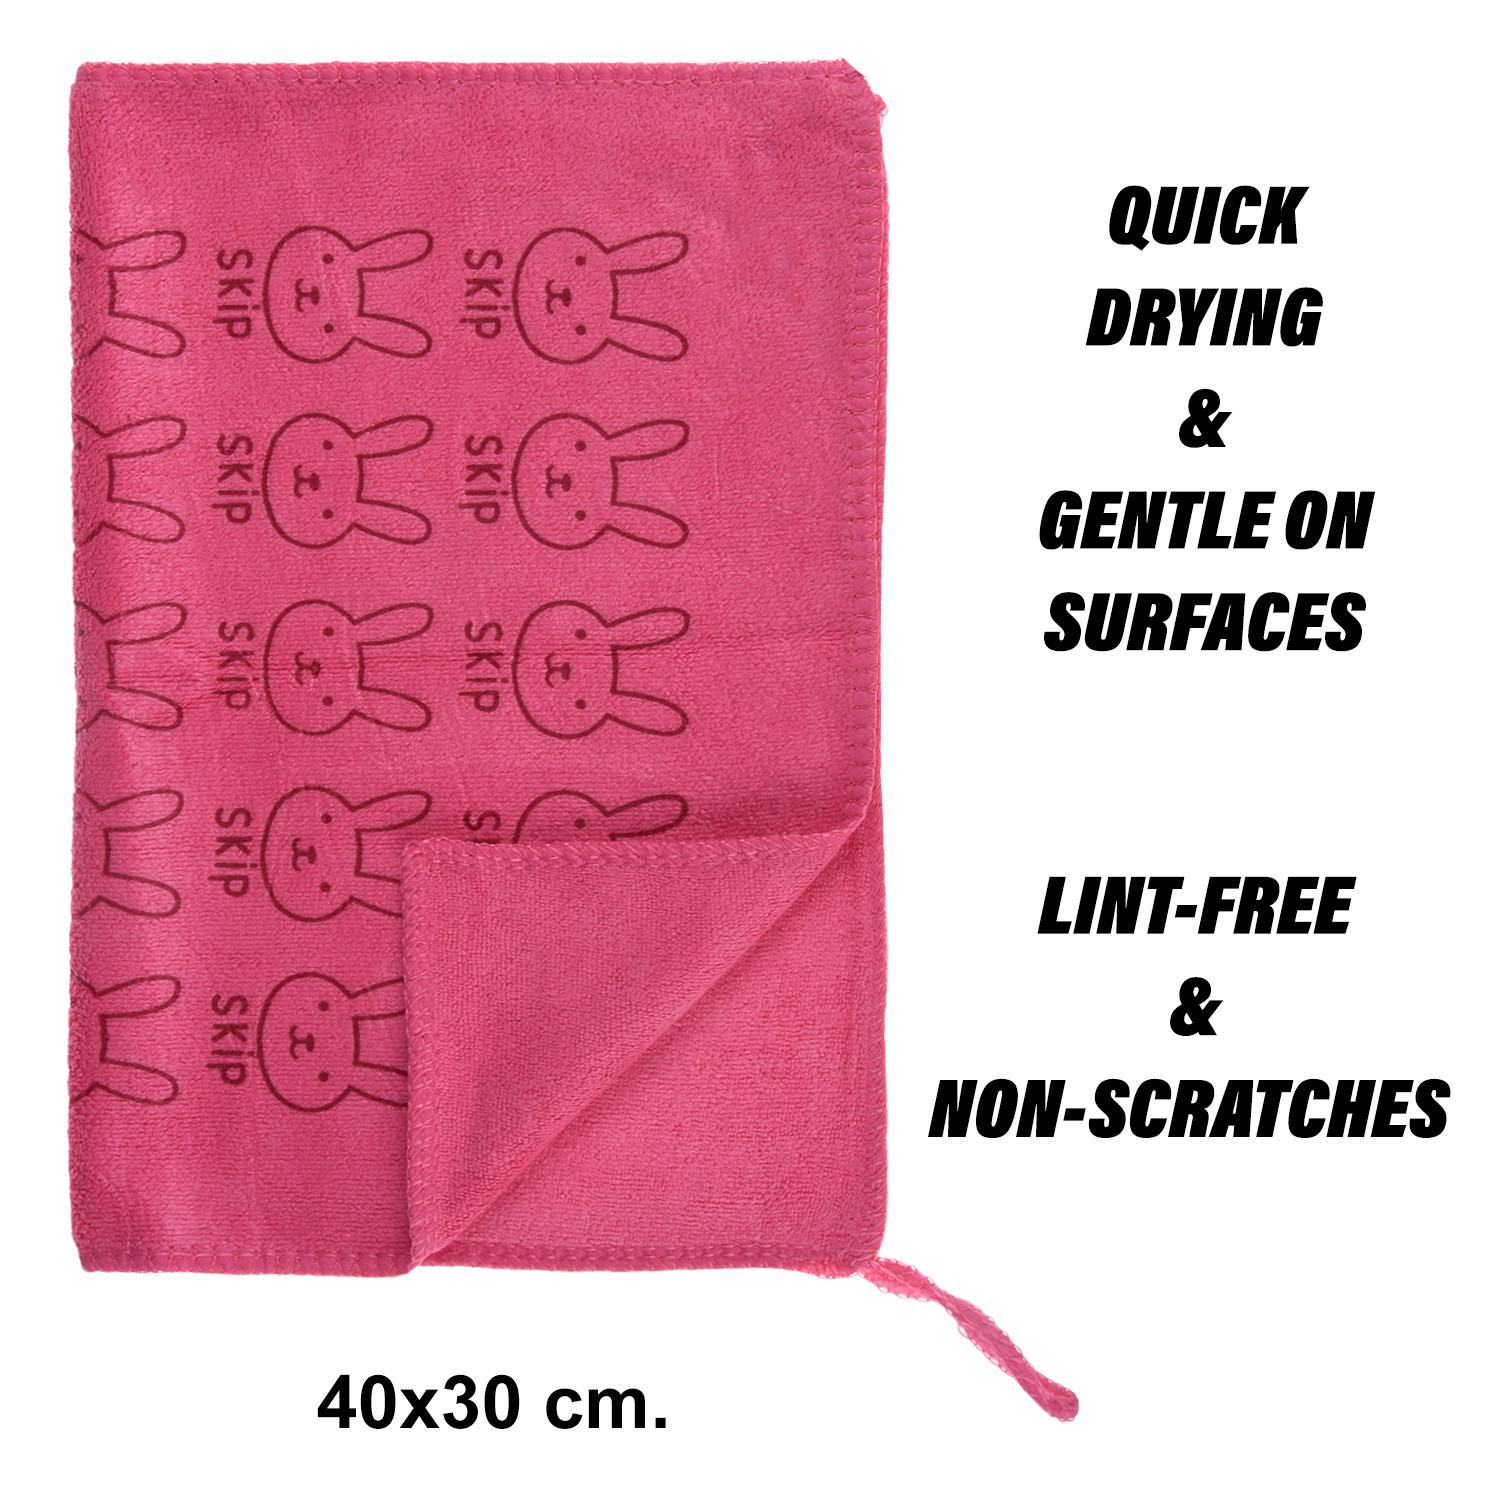 Kuber Industries Cleaning Towel | Reusable Cleaning Towel for Baby | Duster Towel for Home Cleaning | Skip Cleaning Cloth Towel with Hanging Loop | 30x40 |Pink